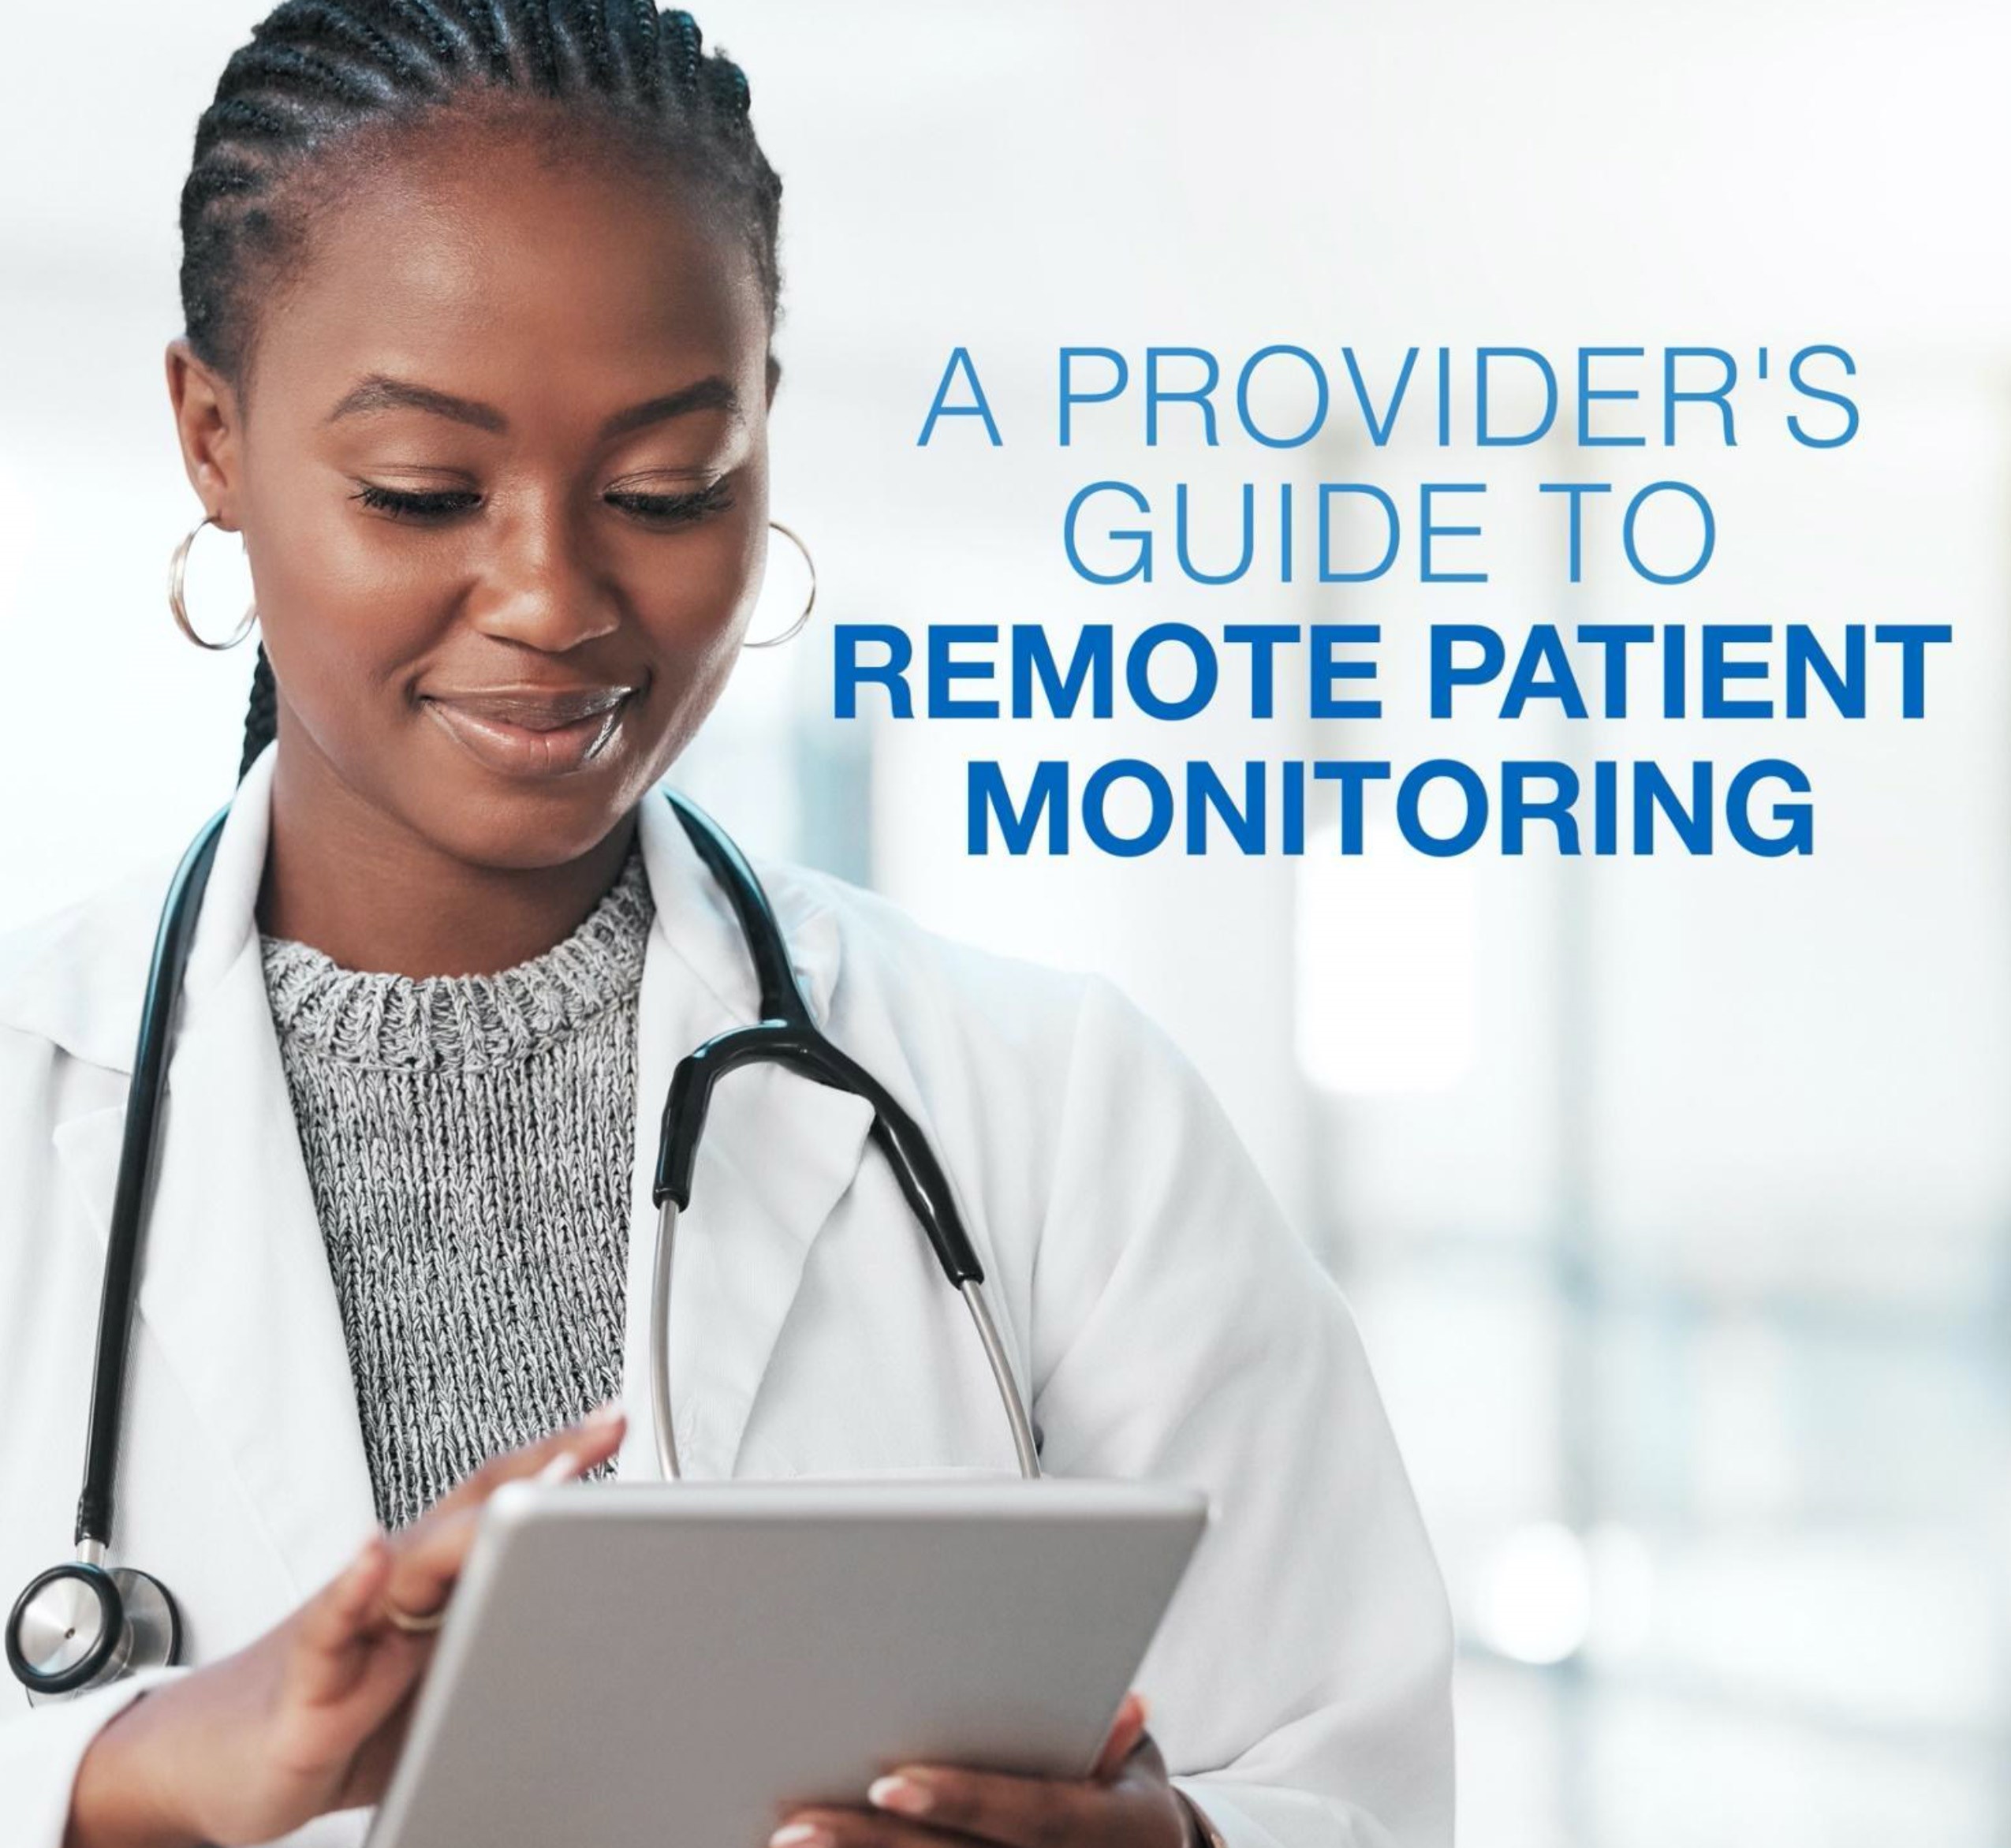 TriageLogic's ebook, A Provider's Guide to Remote Patient Monitoring, includes a female physician checking patient vitals on a tablet.